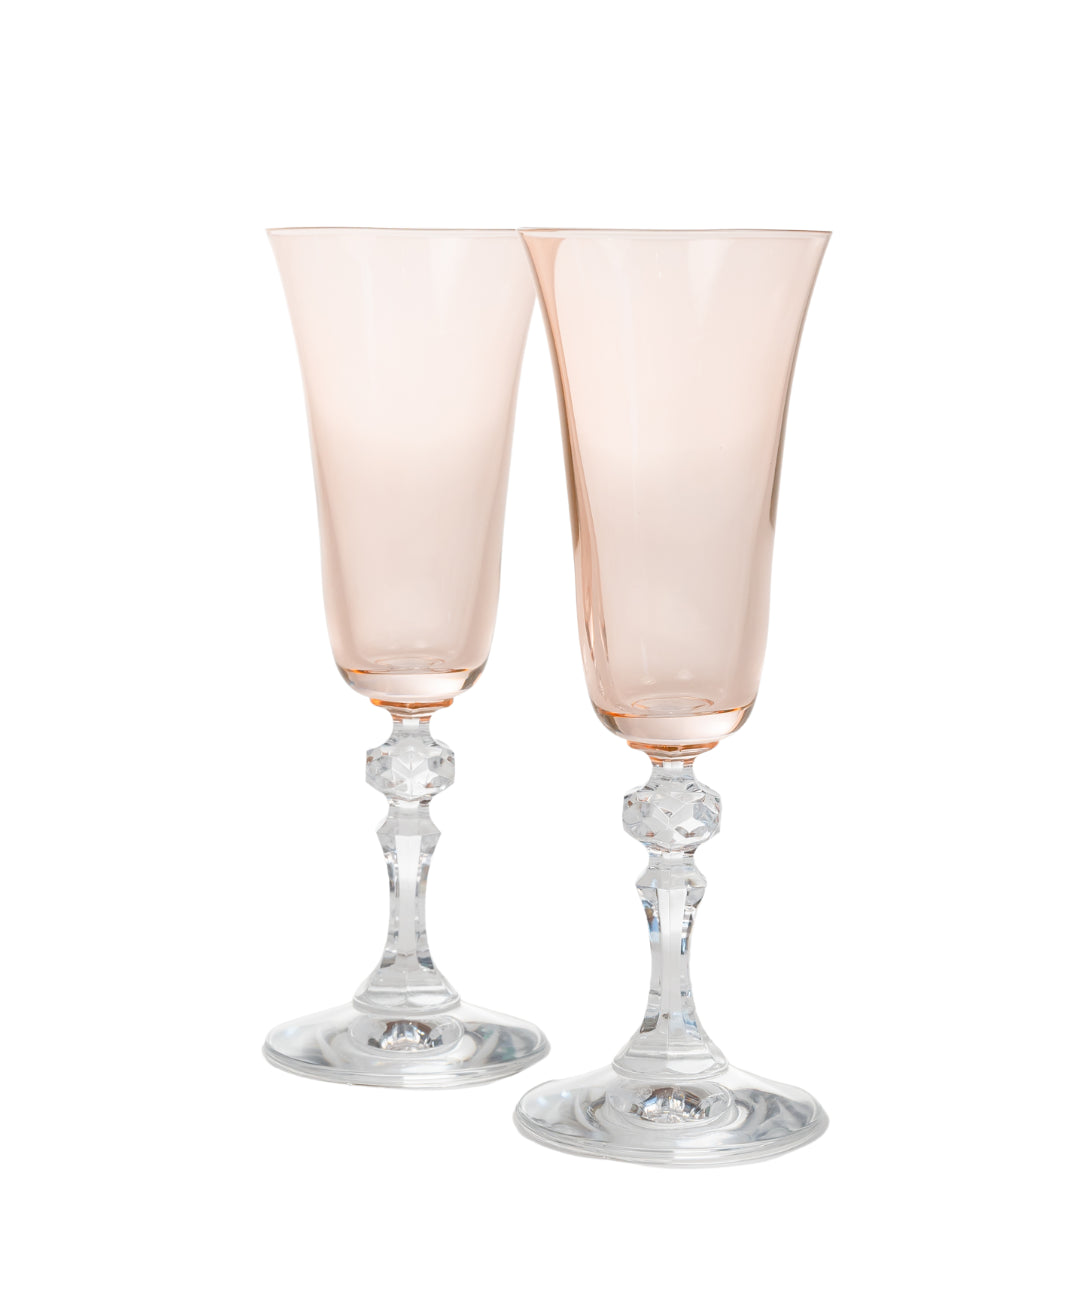 Estelle Colored Regal Flute With Clear Stem, Set of 2 in Blush Pink